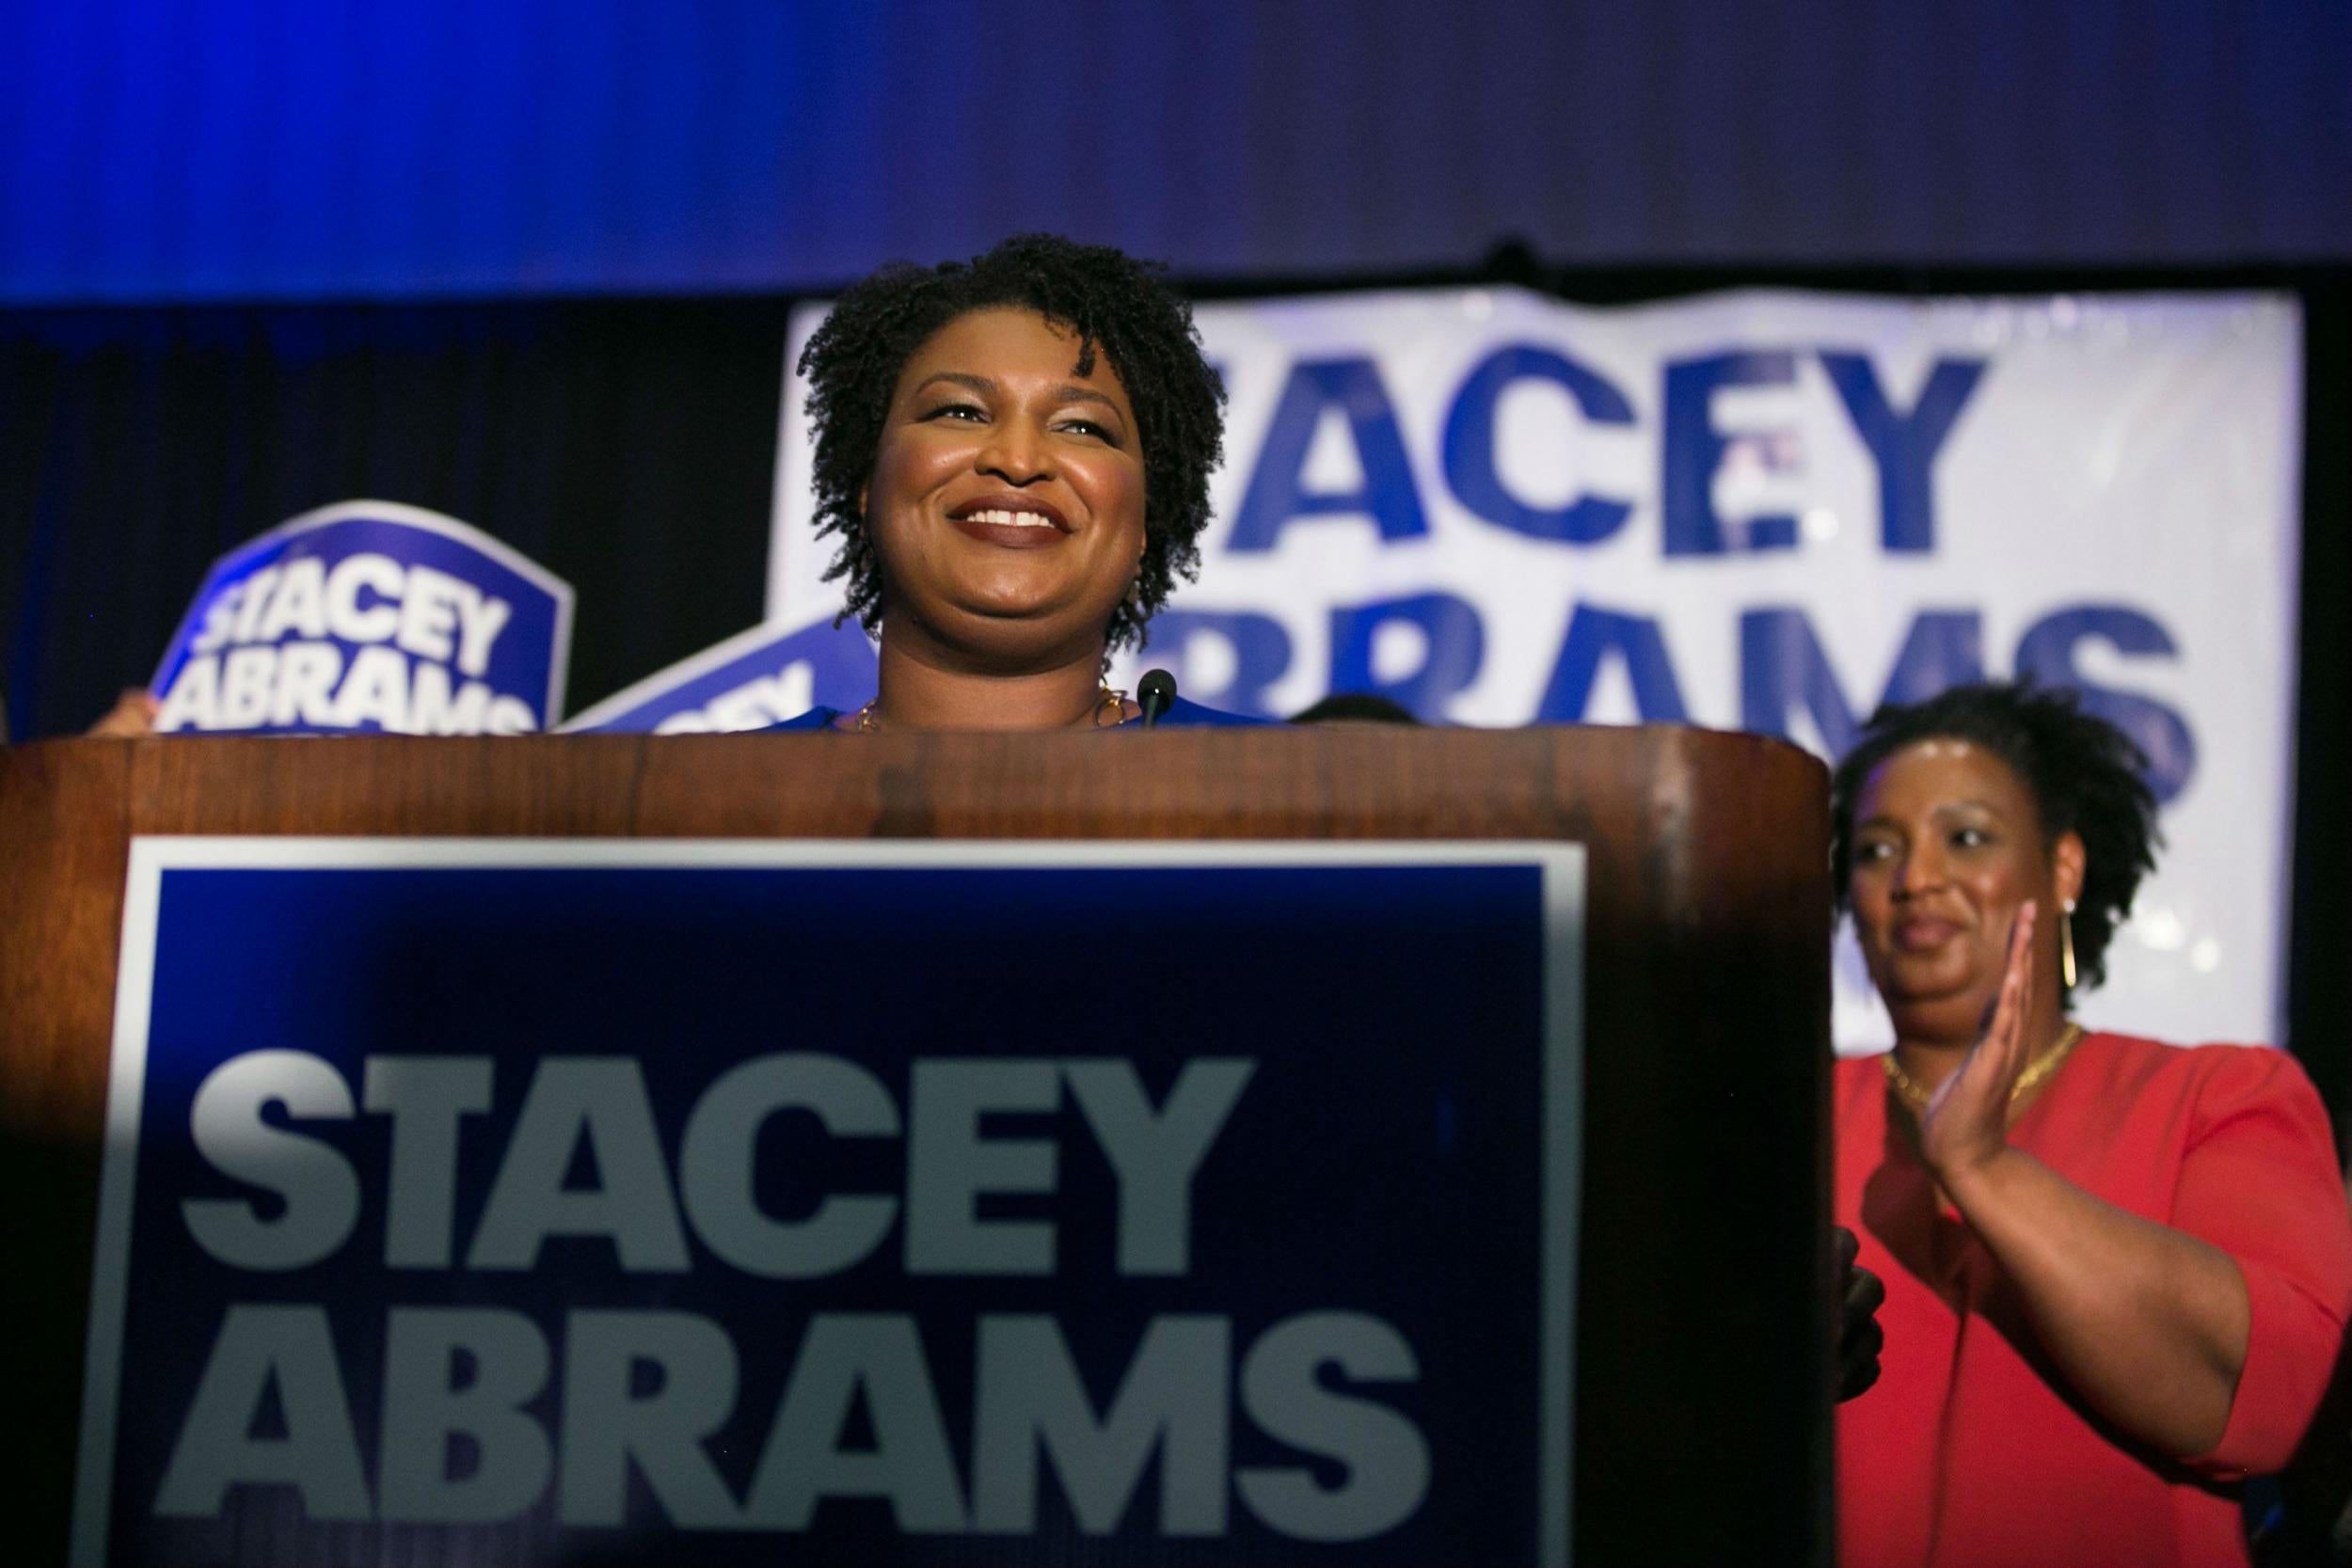 Stacey Abrams at the podium